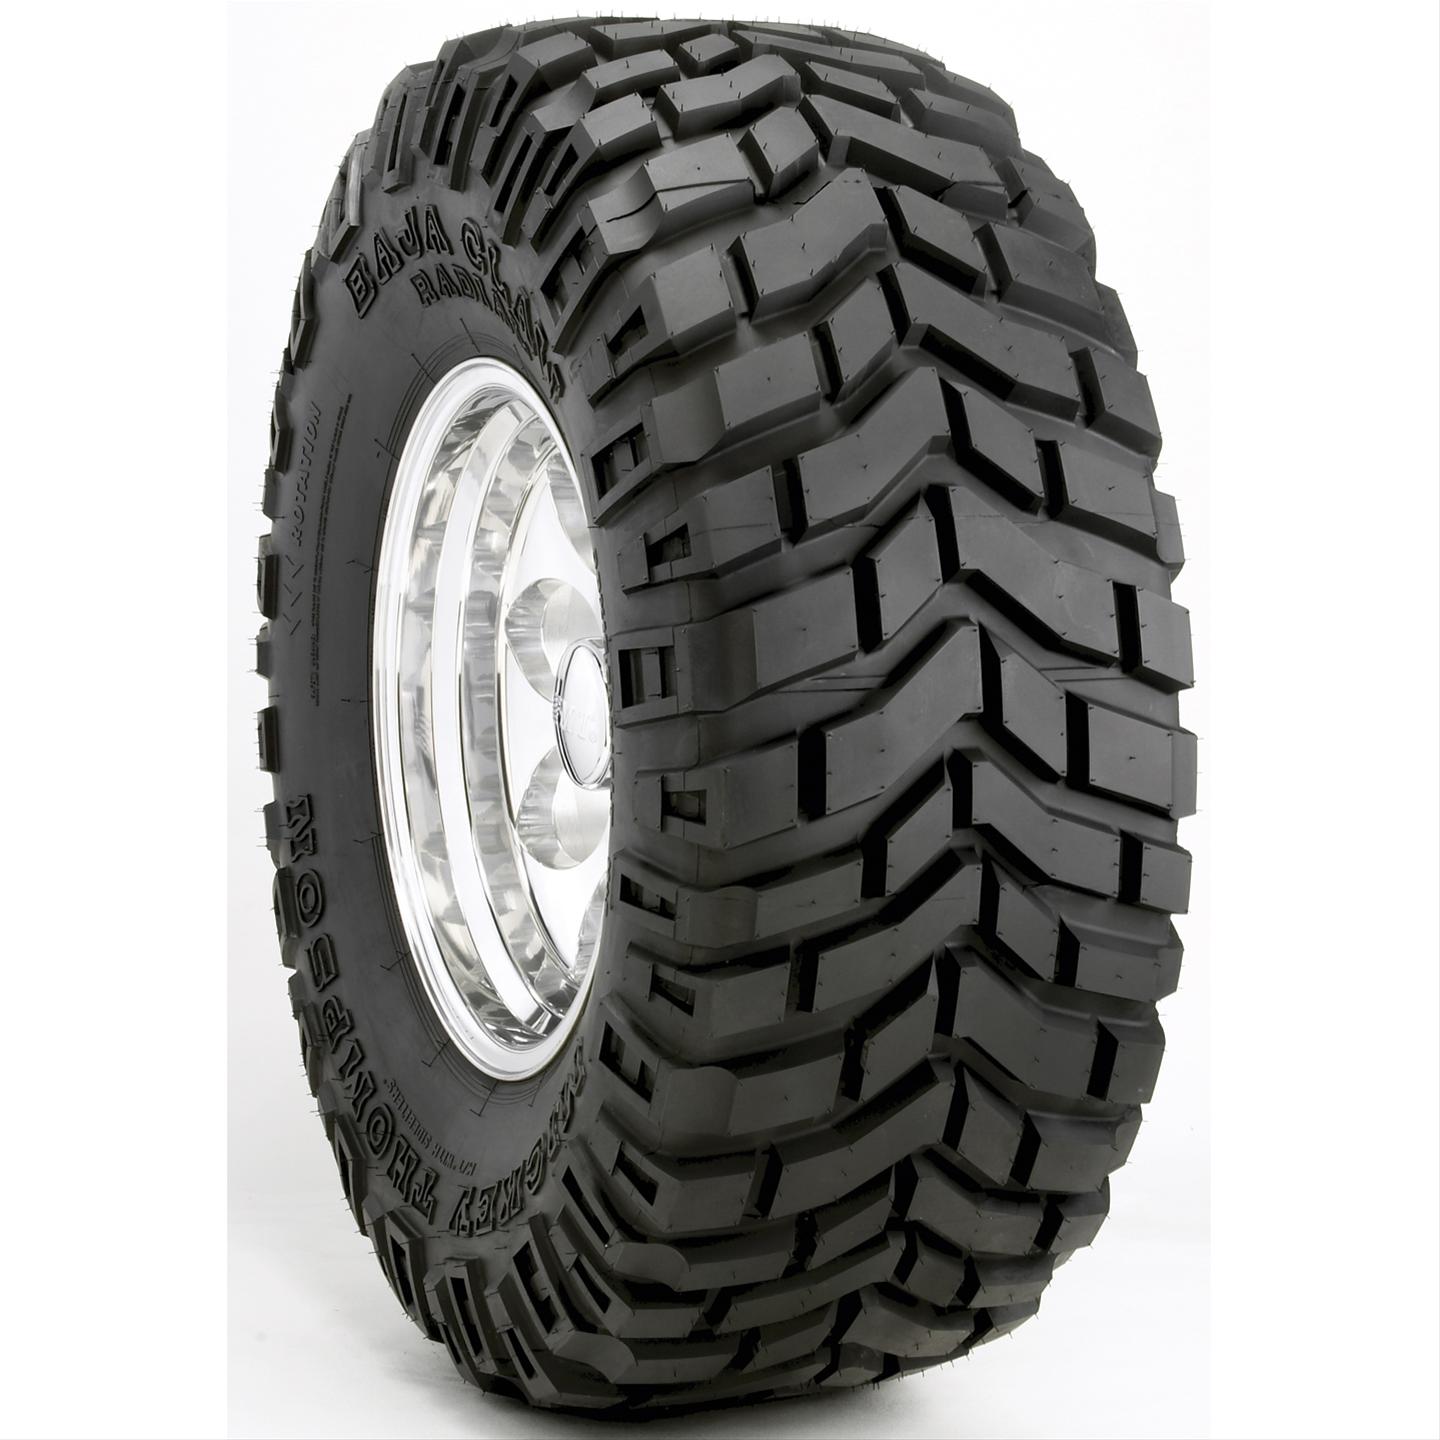 Mickey Thompson Baja Claw Radial Tires 90000000148 - Free Shipping on